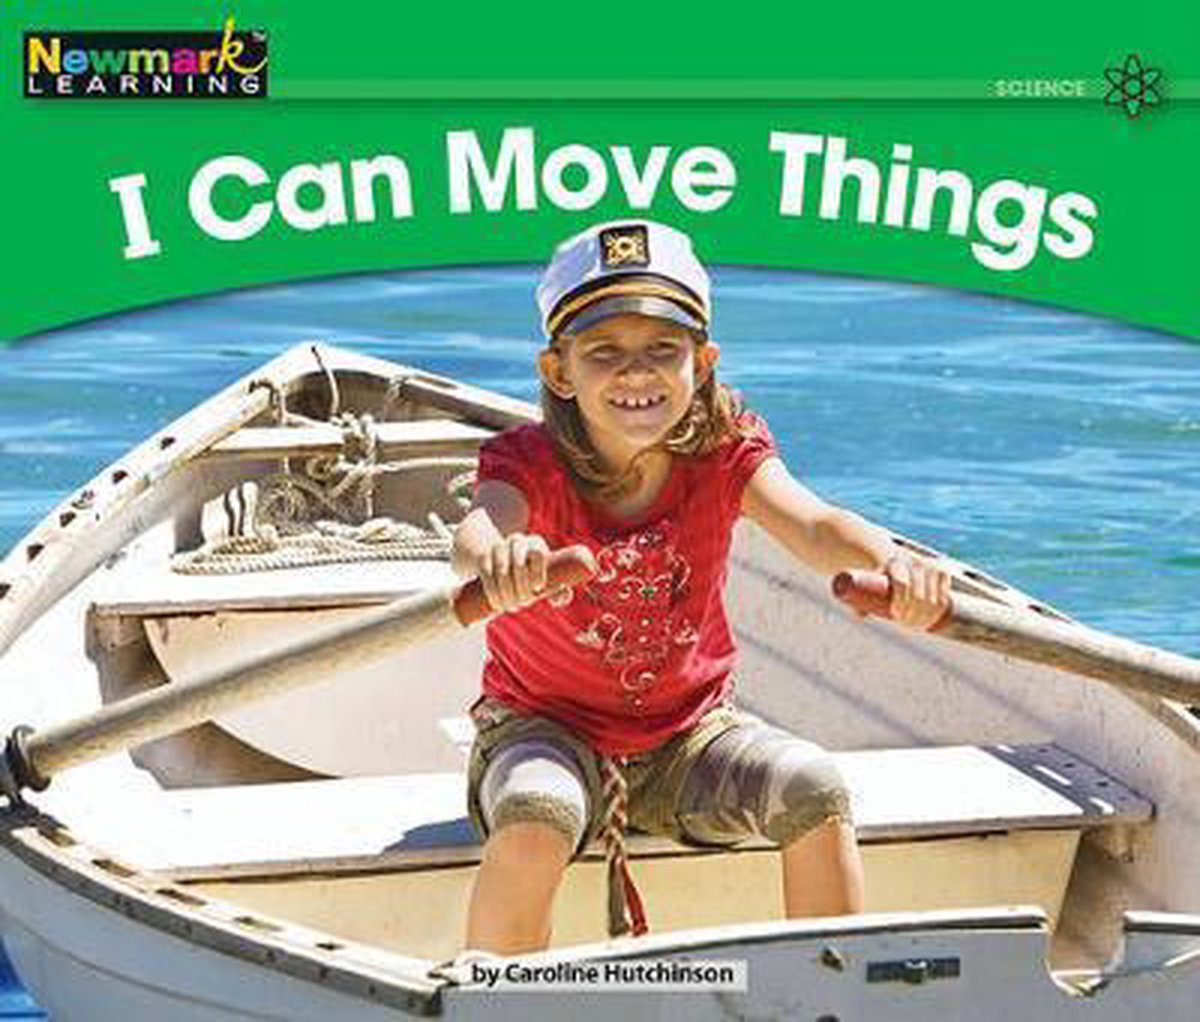 Rising Readers: Science, Level B- I Can Move Things Leveled Text